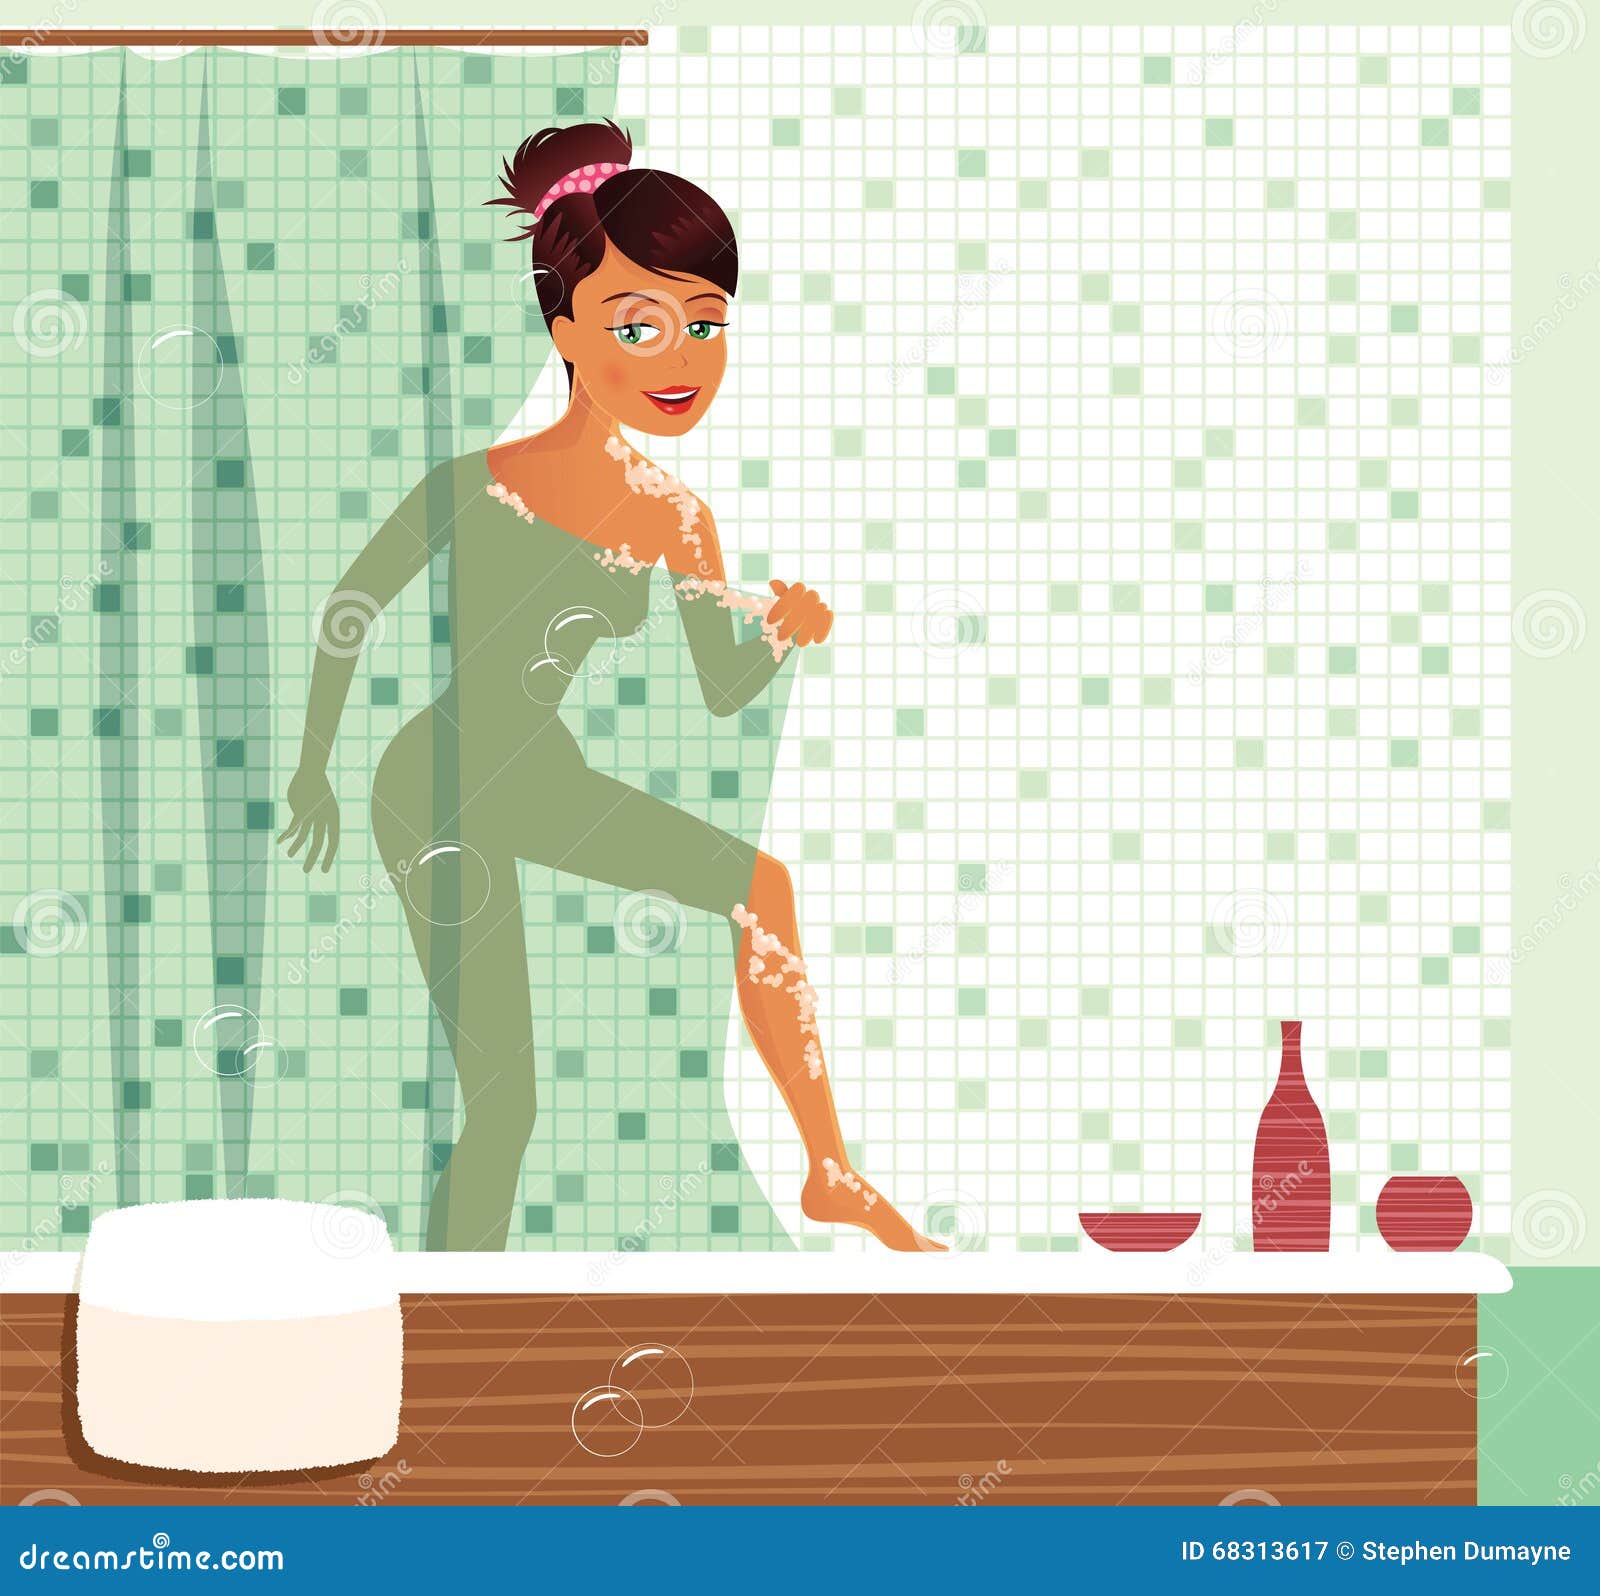 Have a Shower. Девушка в душе иллюстрация. Illustration of taking a Shower. She a shower now